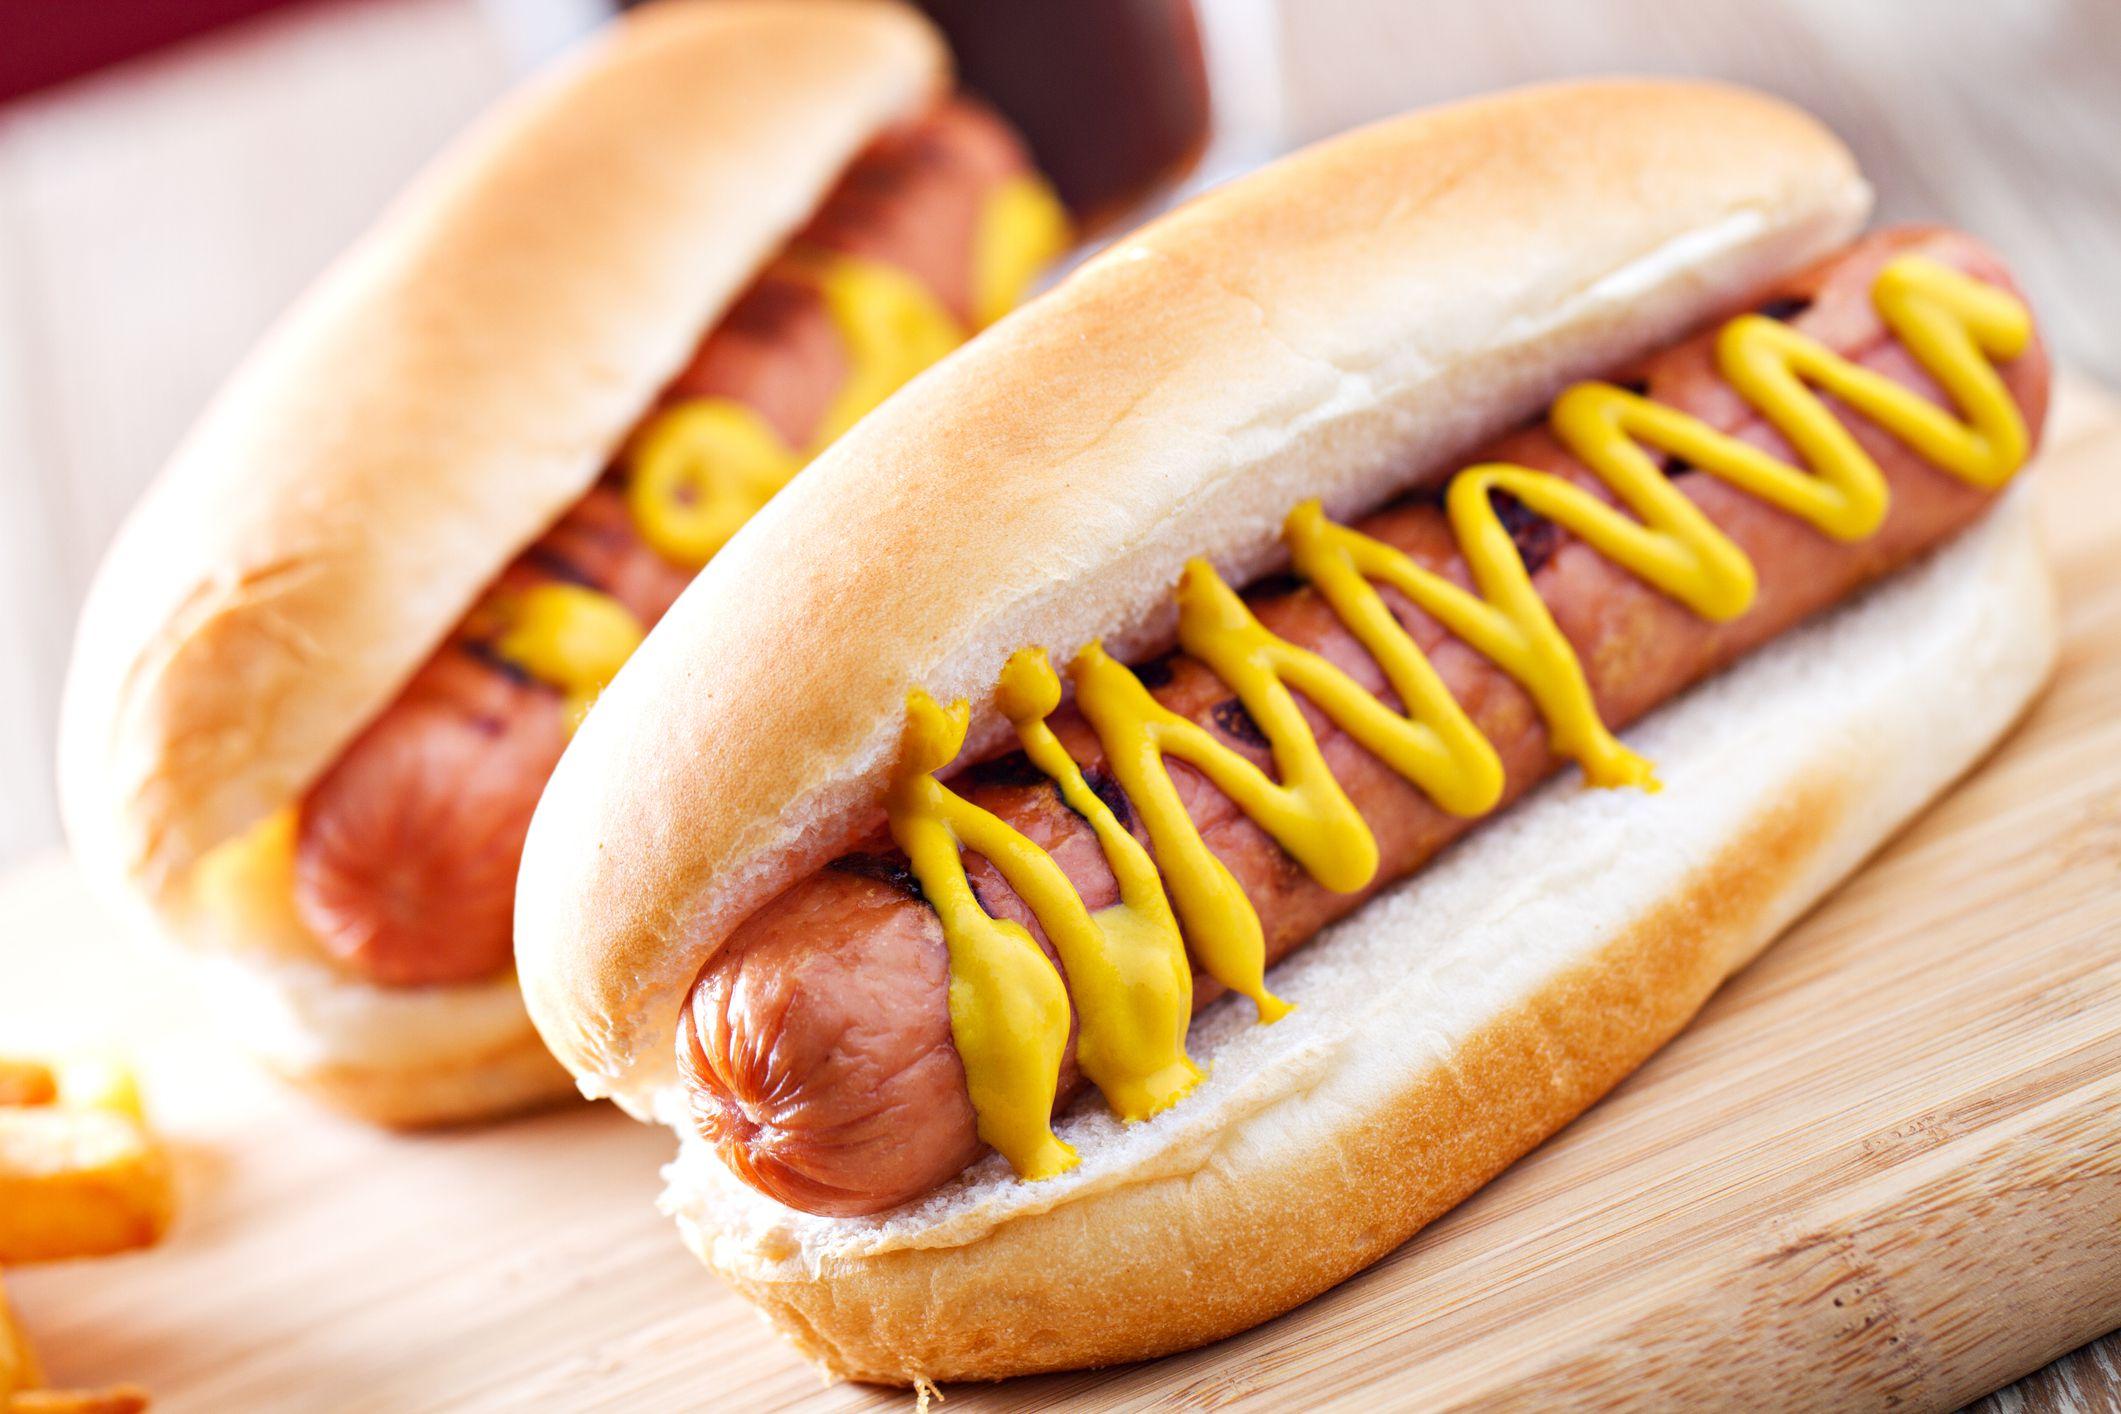 American Hot Dog Styles Types Of Hot Dogs from U.S. Cities